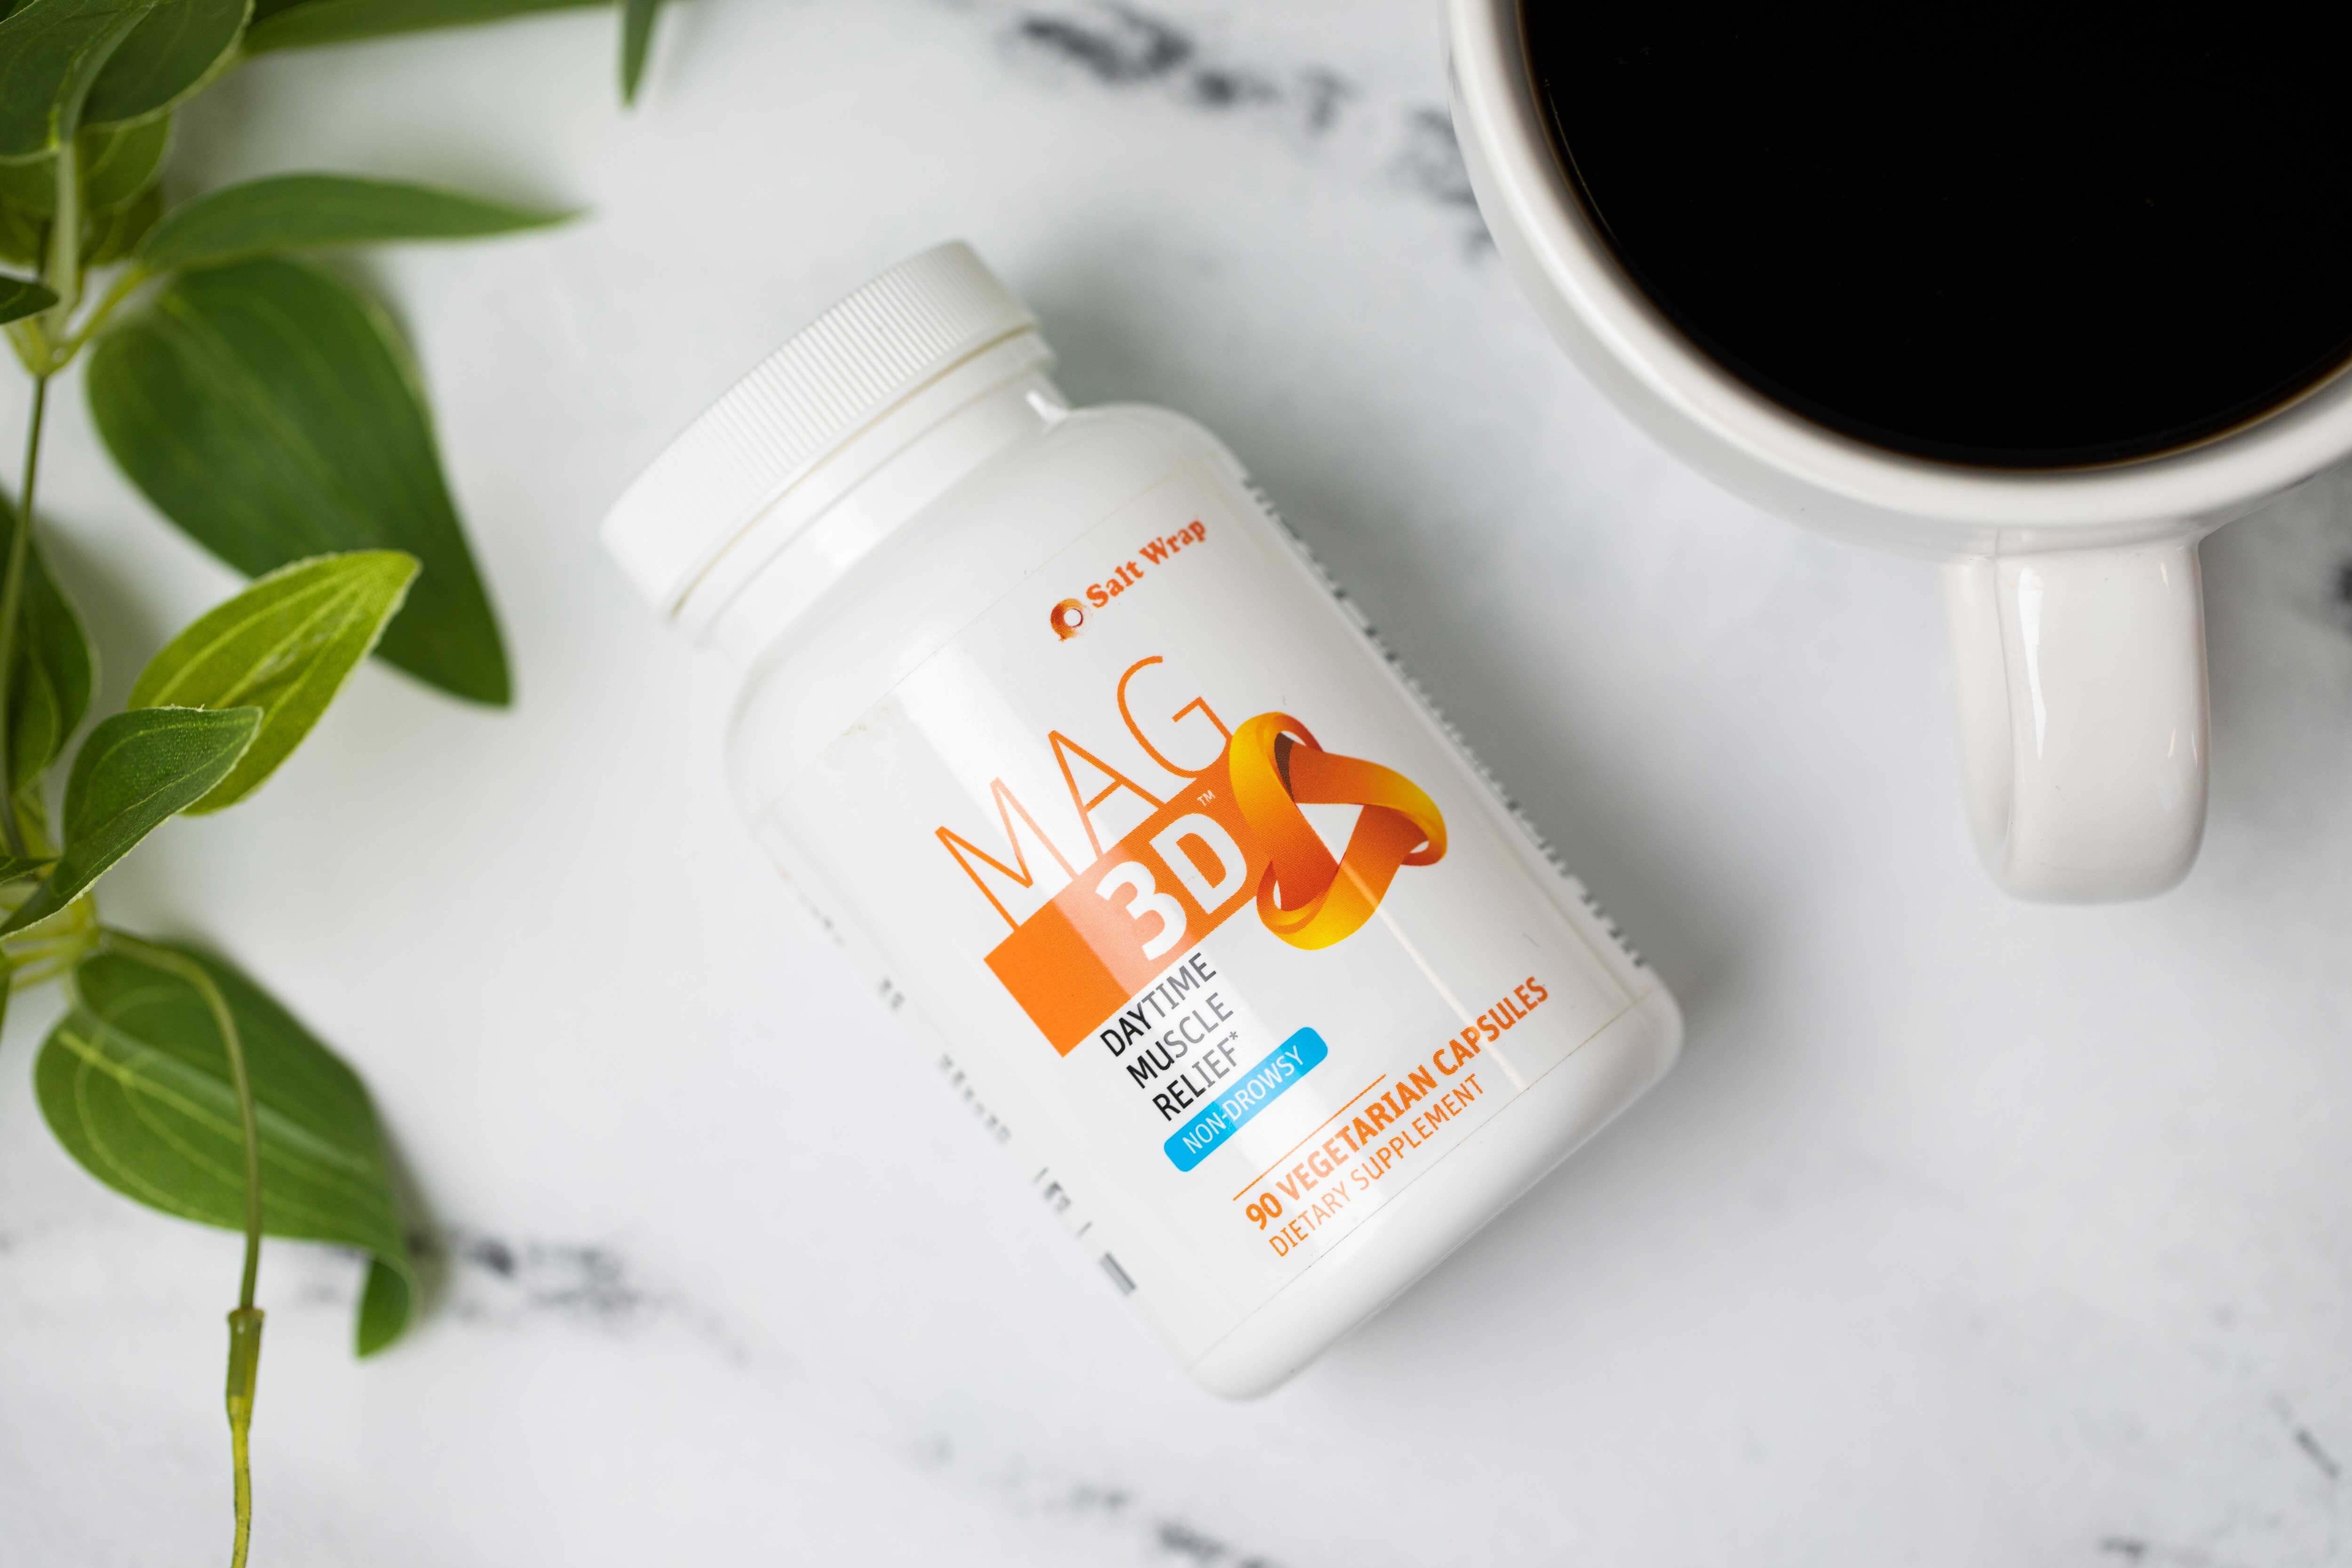 Mag 3D™ is the perfect daytime solution for muscle, nerve, and energy support.